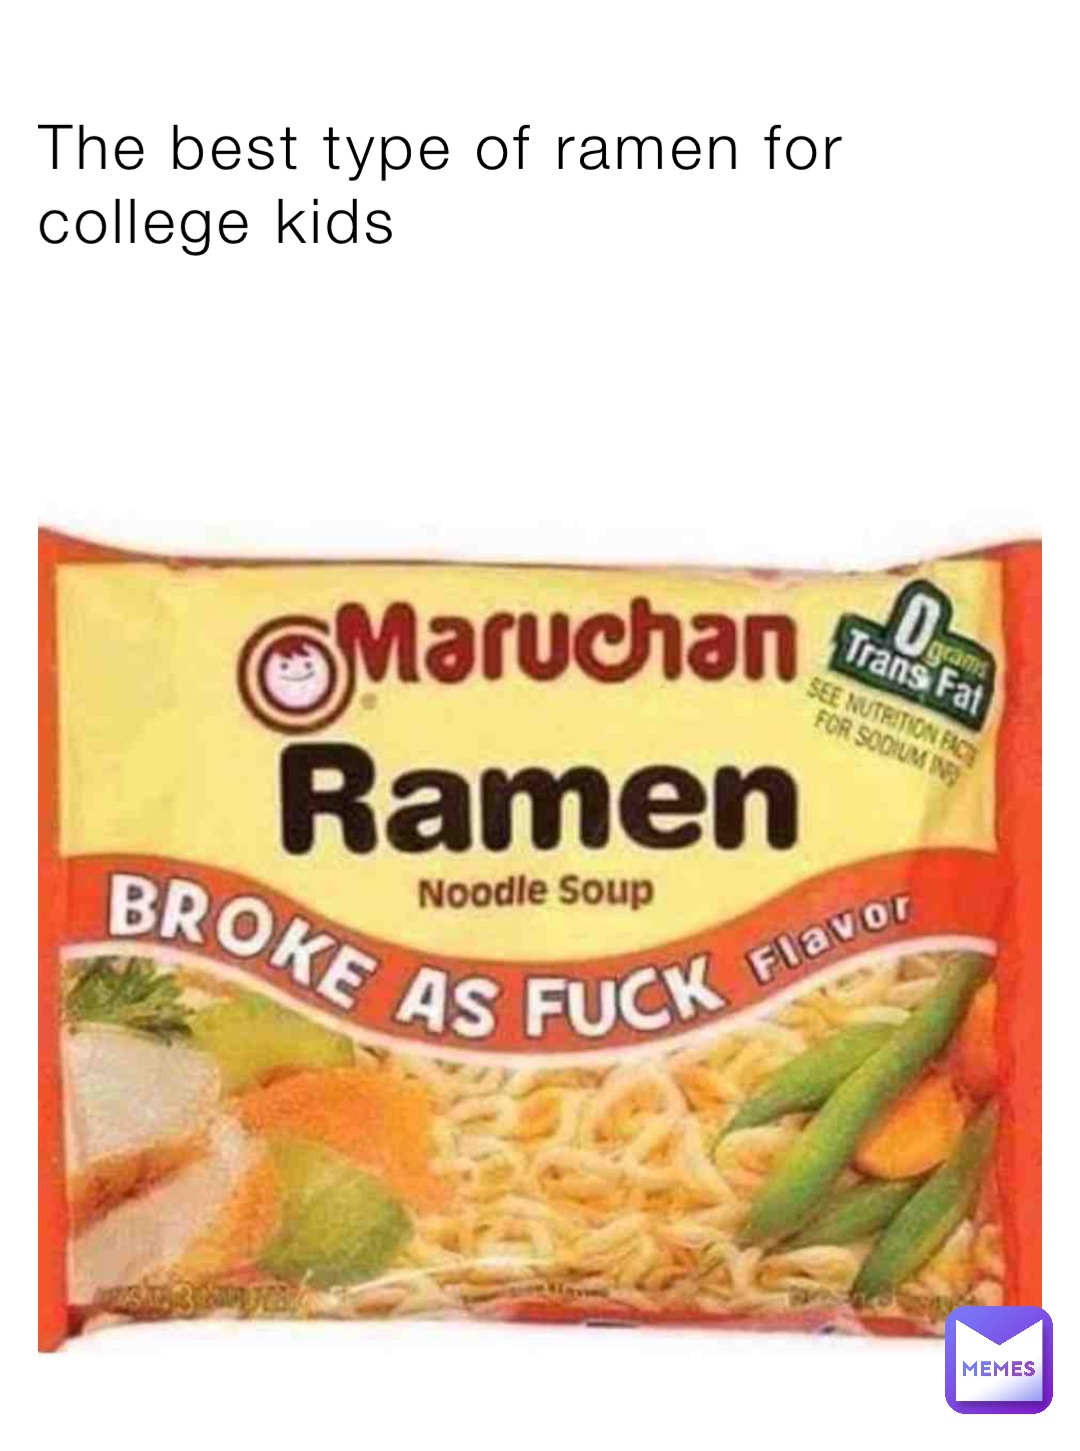 The best type of ramen for college kids